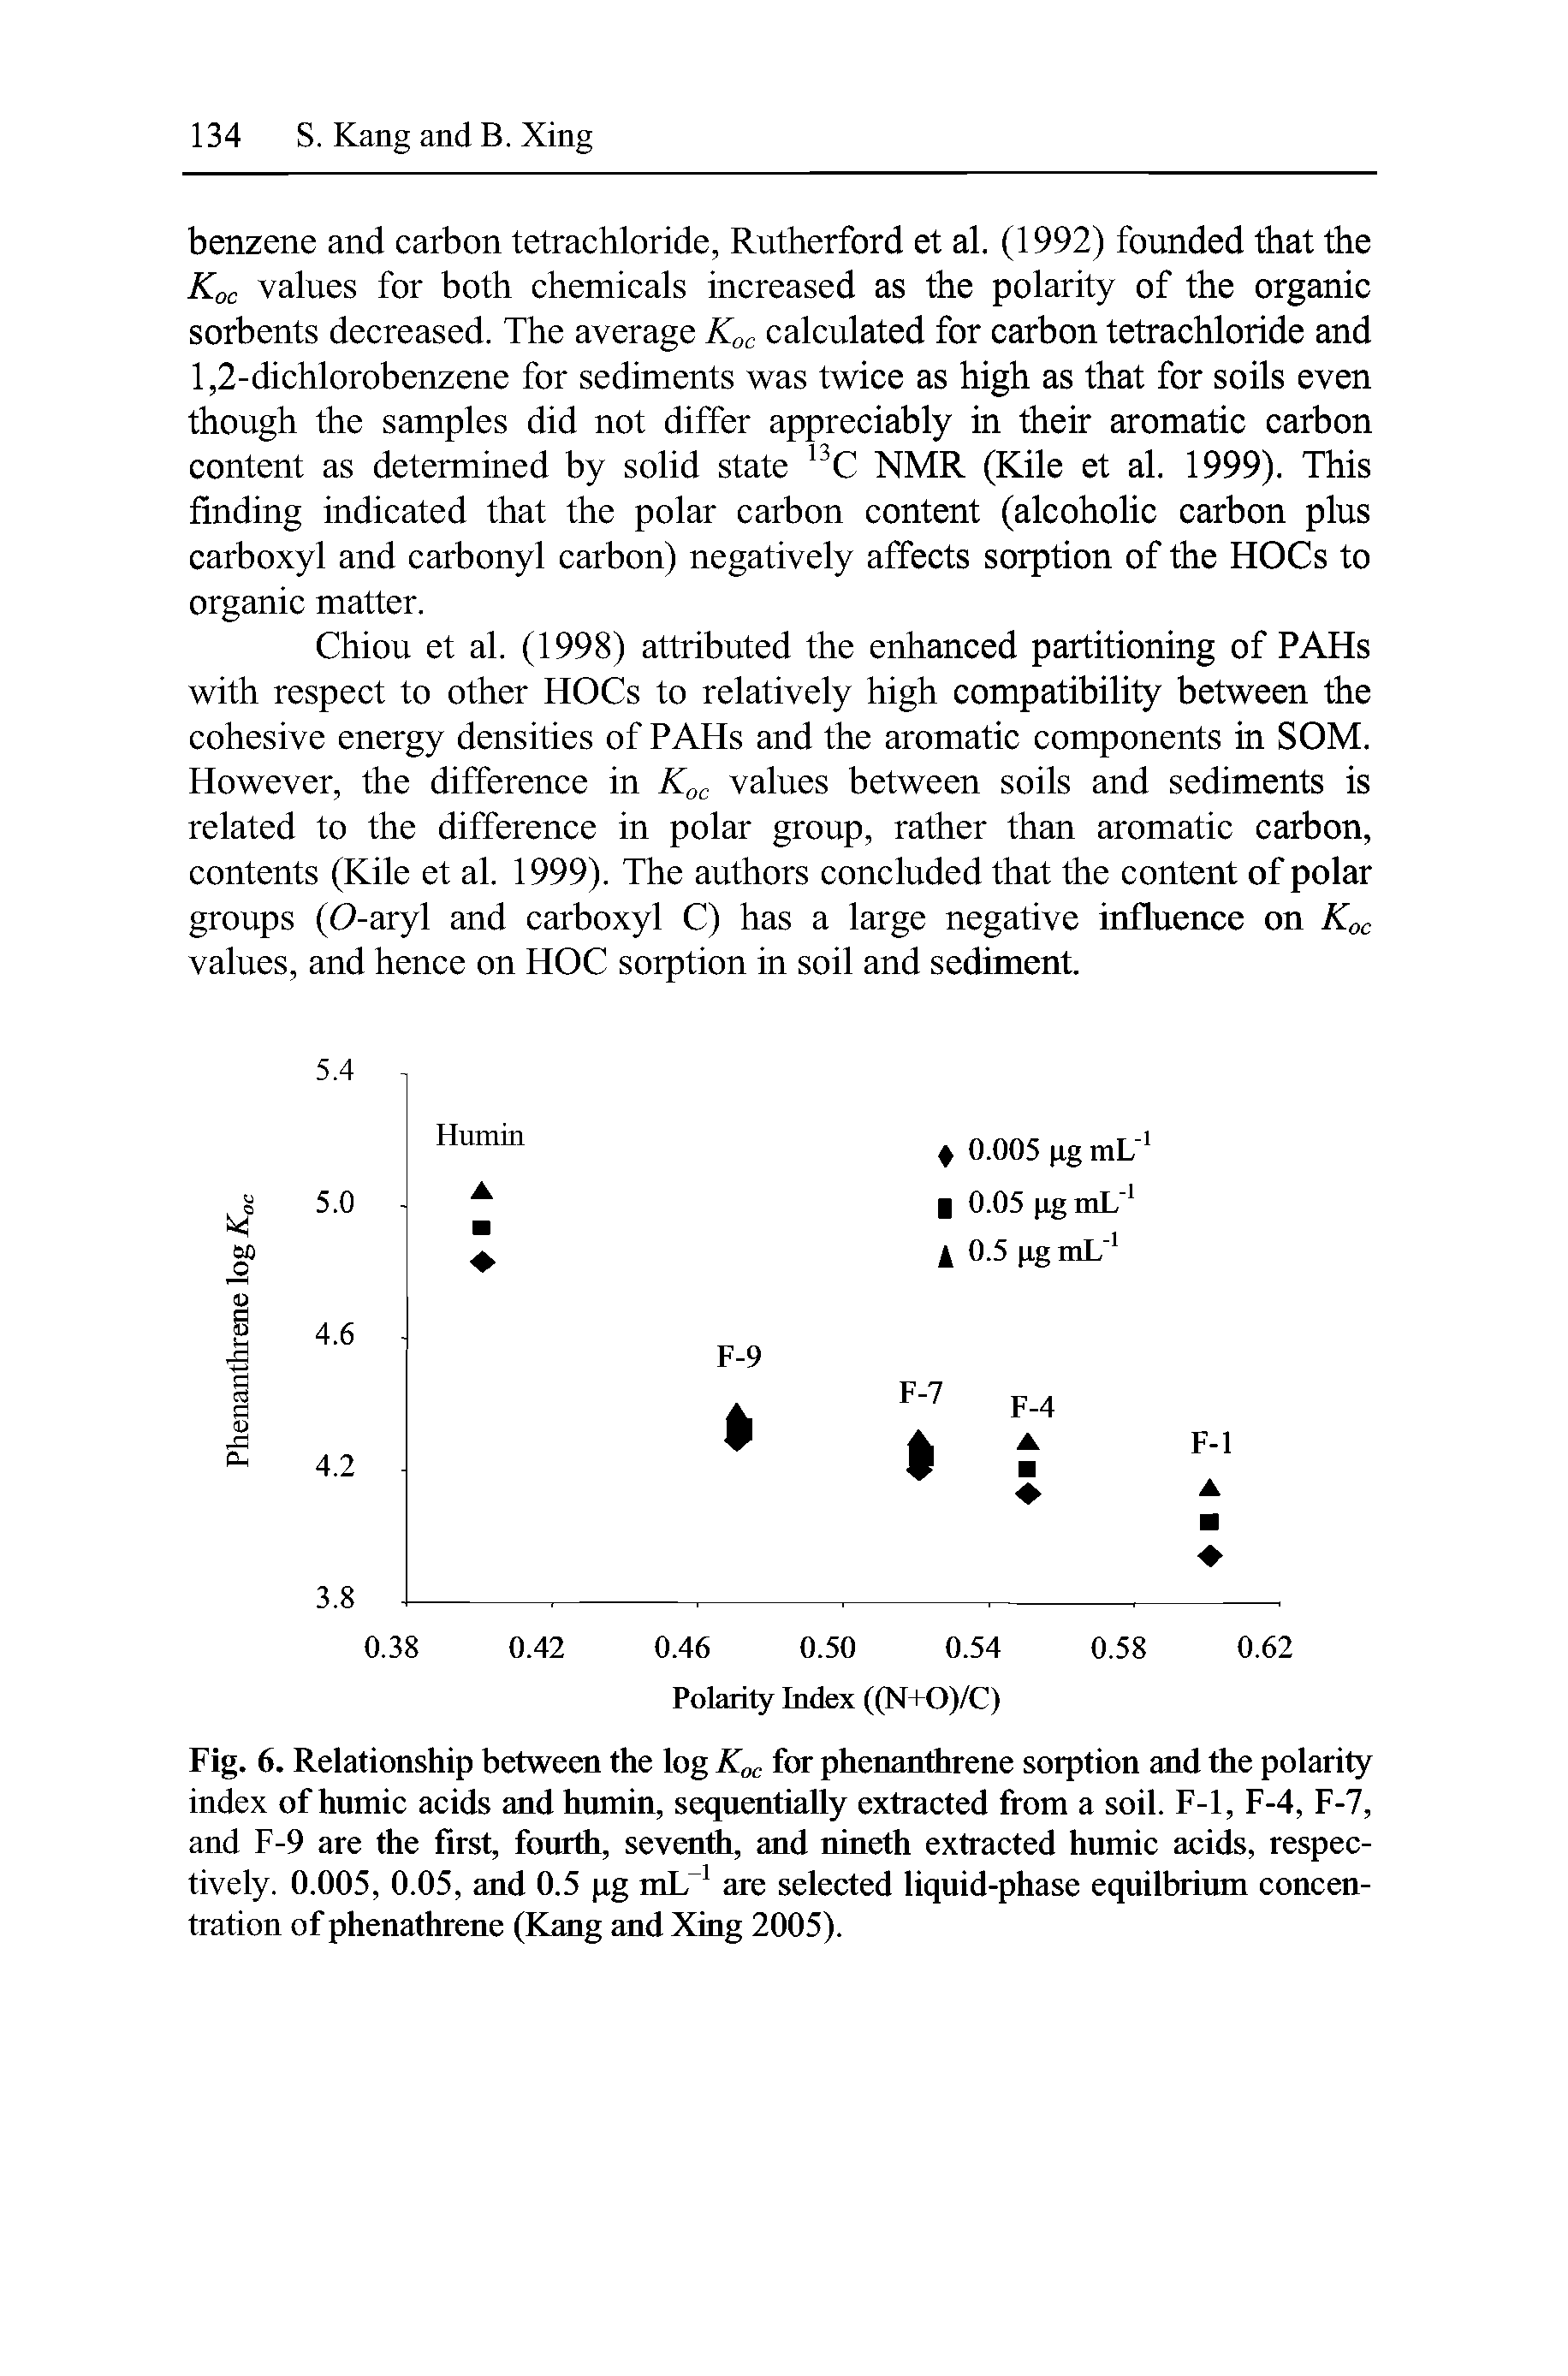 Fig. 6. Relationship between the log Koc for phenanthrene sorption and the polarity index of humic acids and humin, sequentially extracted from a soil. F-l, F-4, F-7, and F-9 are the first, fourth, seventh, and nineth extracted humic acids, respectively. 0.005, 0.05, and 0.5 ig mL 1 are selected liquid-phase equilbrium concentration of phenathrene (Kang and Xing 2005).